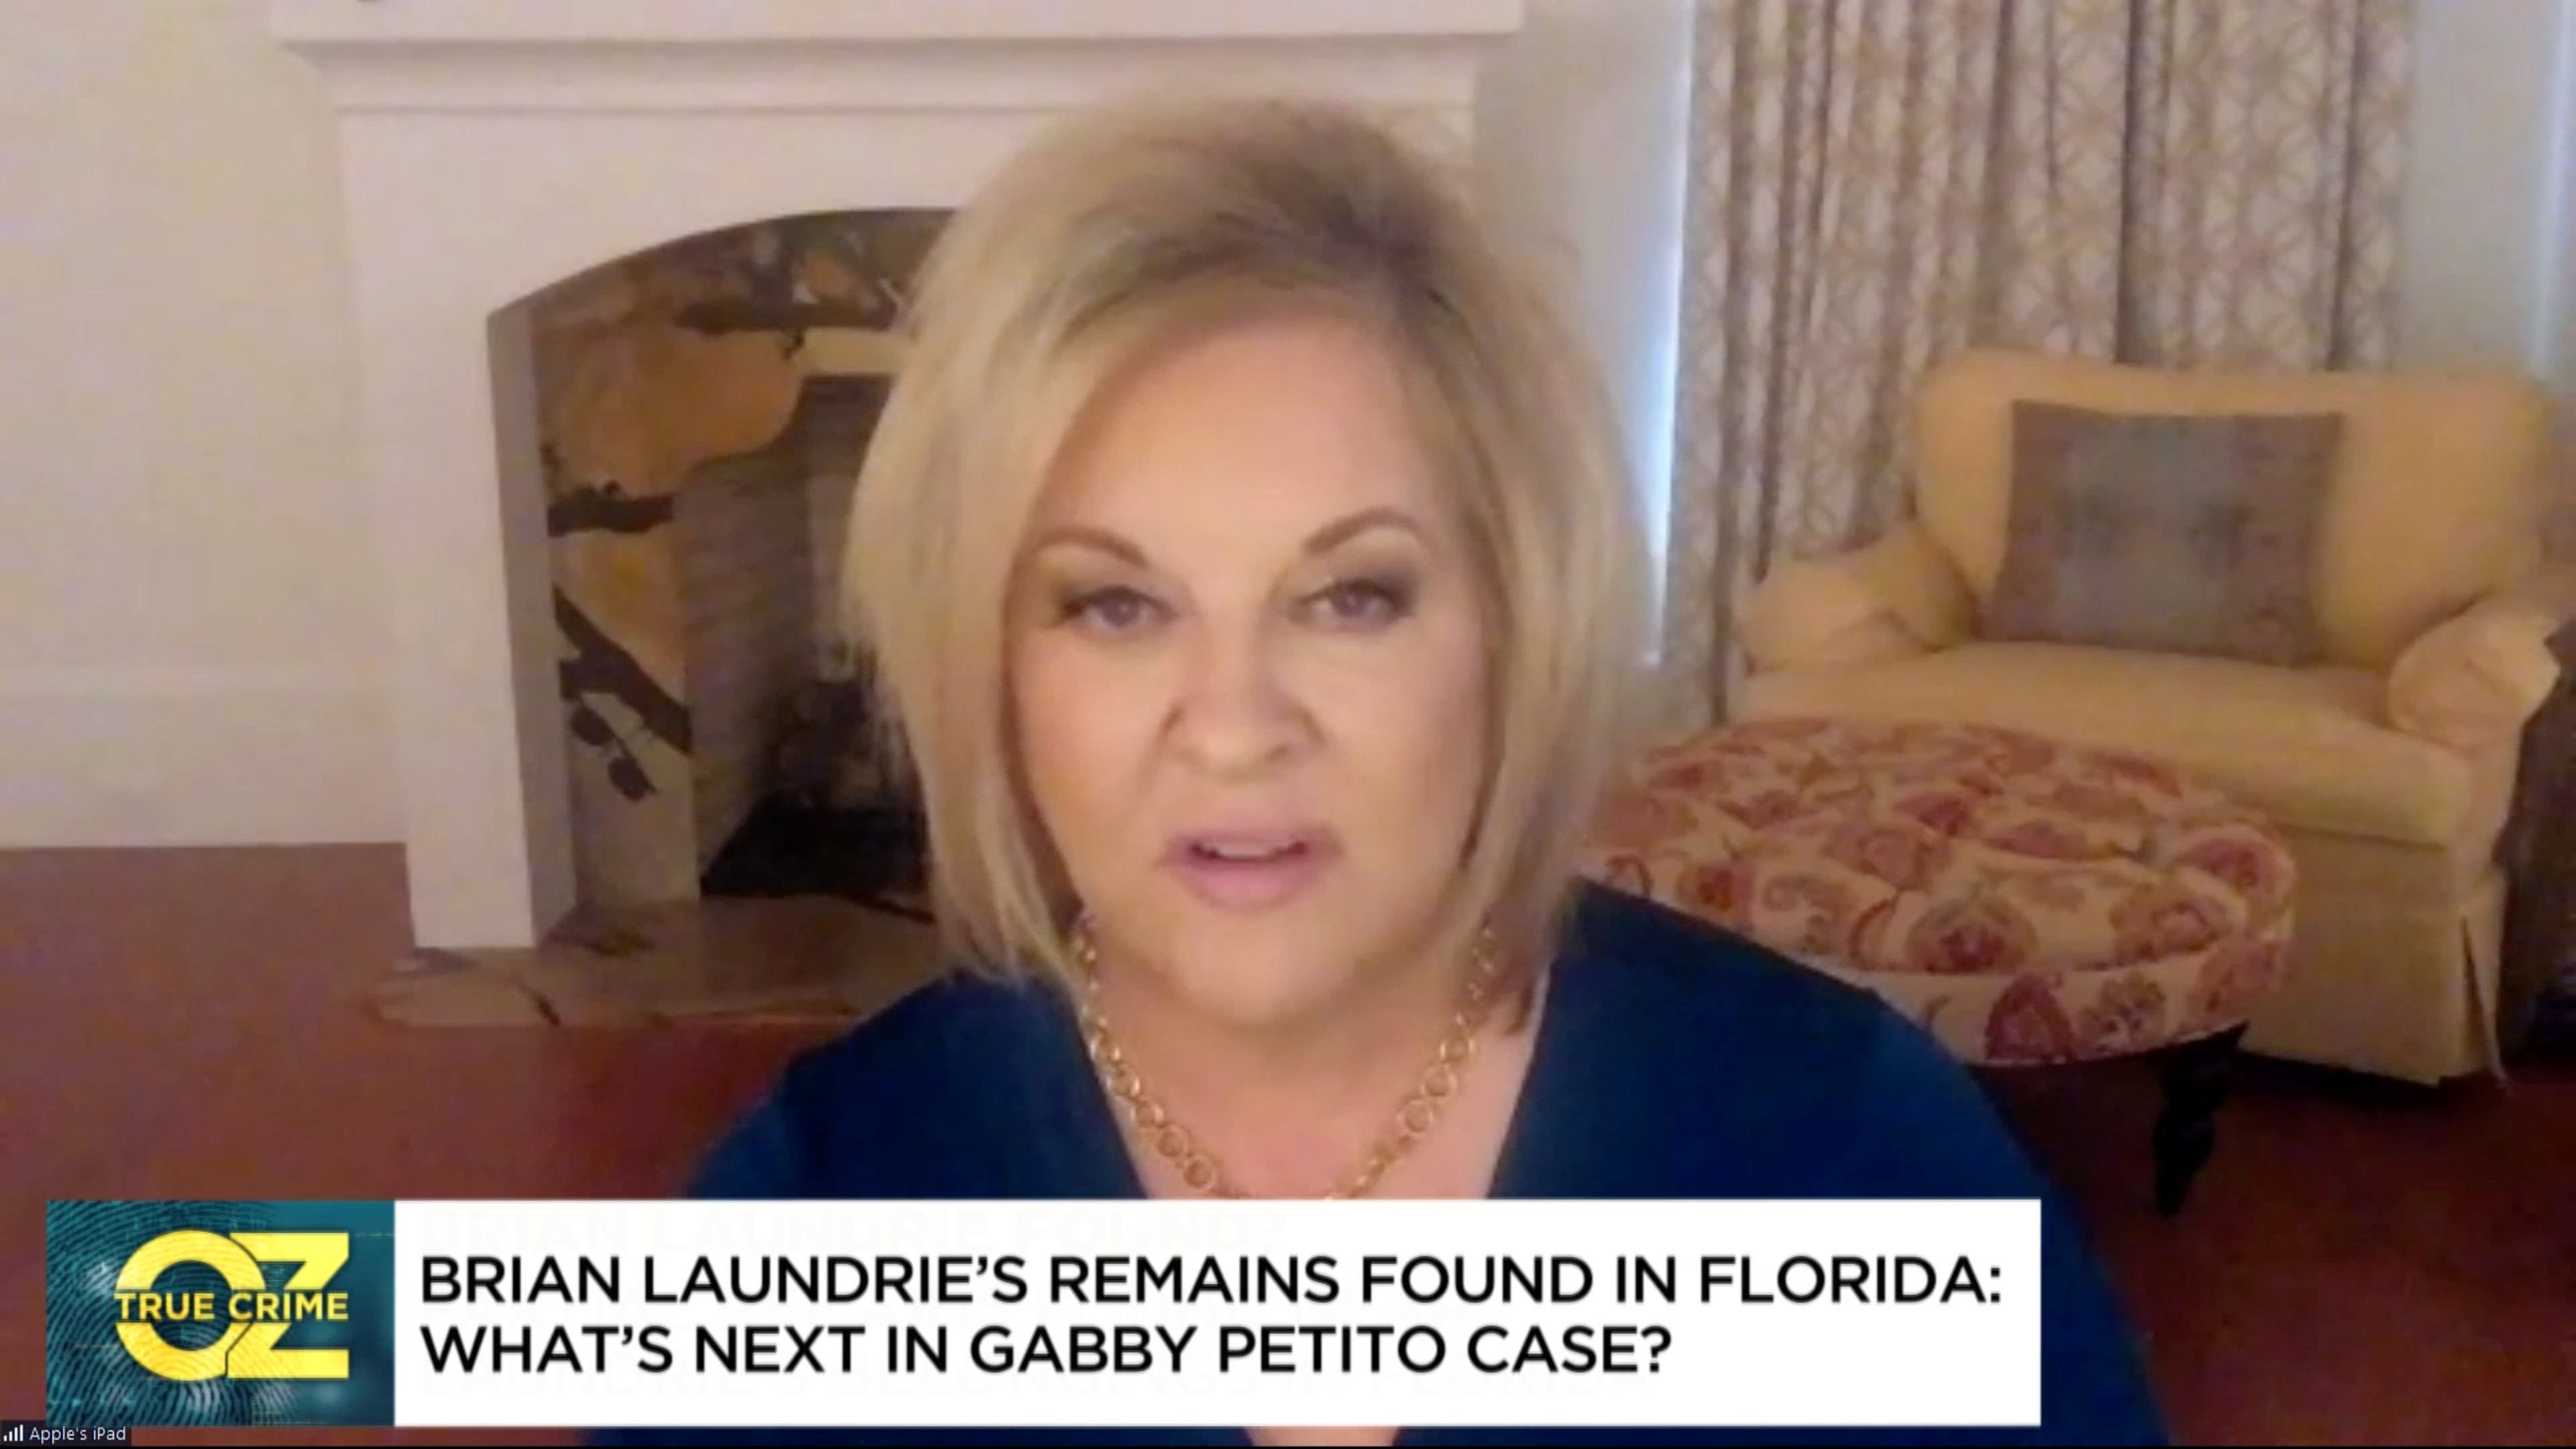 Nancy Grace Weighs In On The Fact That These Items And Remains Were Found In An Area Brian’s Parents Told Them To Search